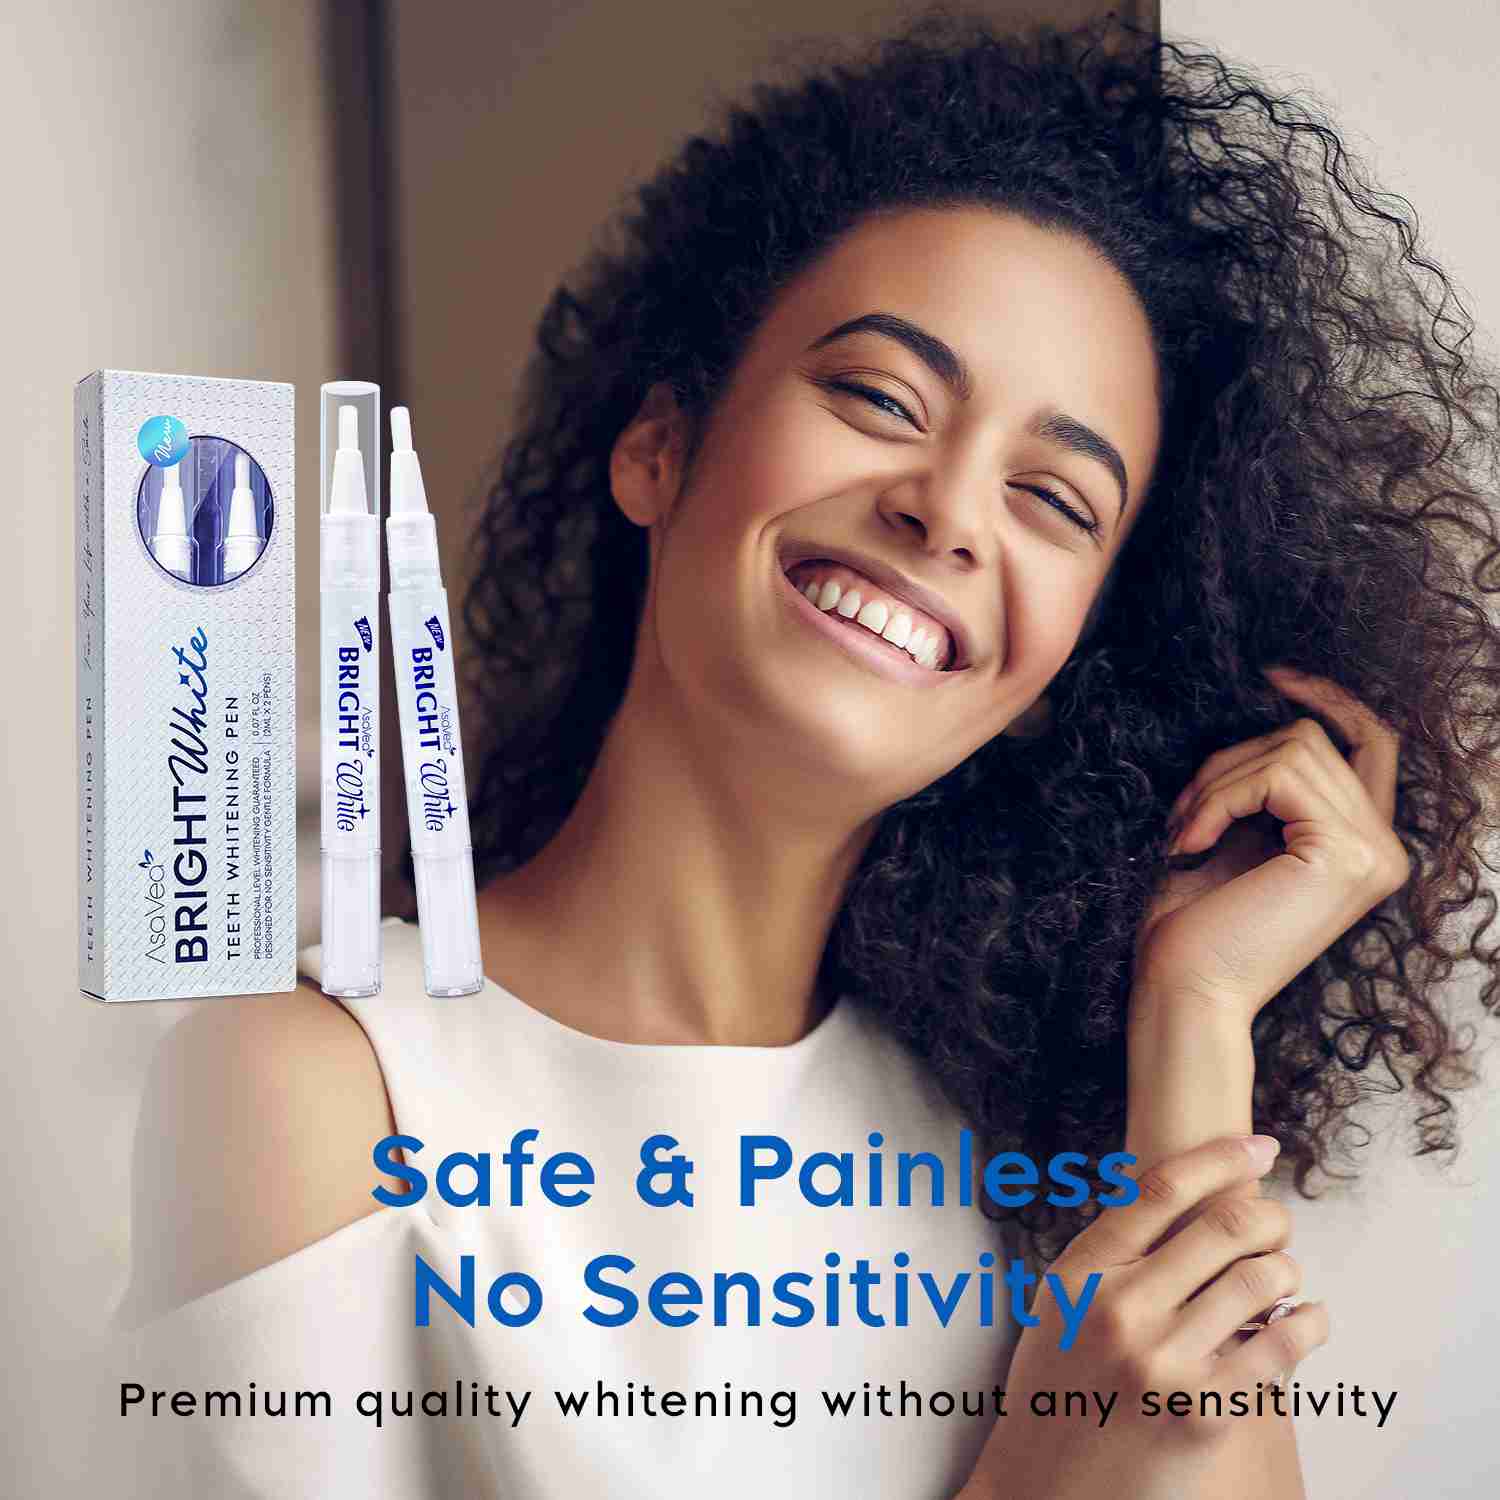 teeth-whitening-pen-free-after-rebaid with discount code